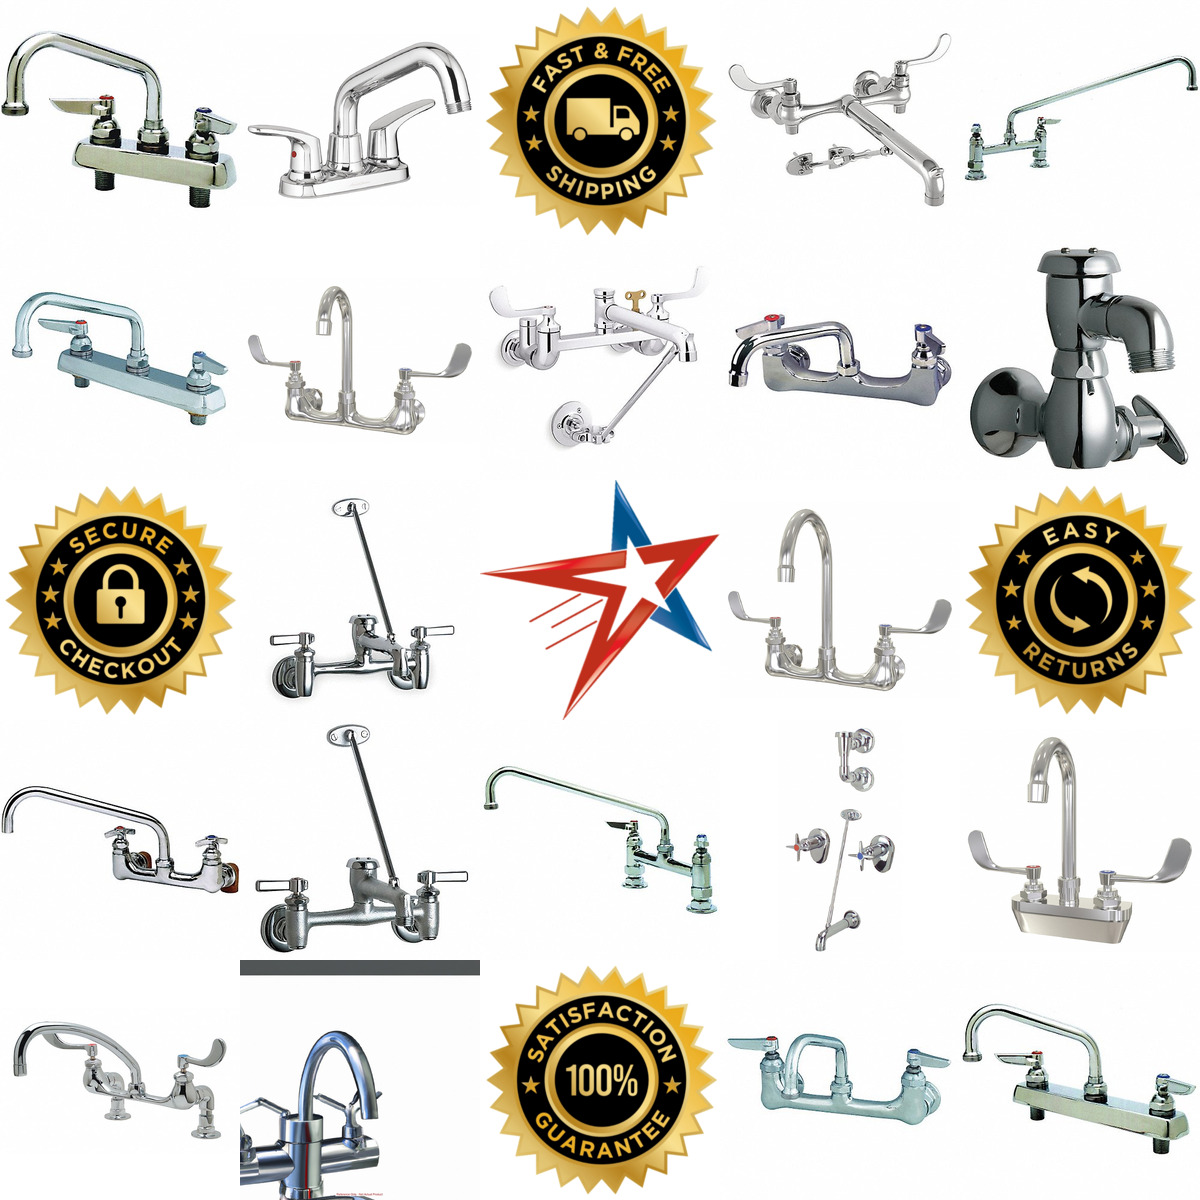 A selection of Utility Sink Faucets products on GoVets